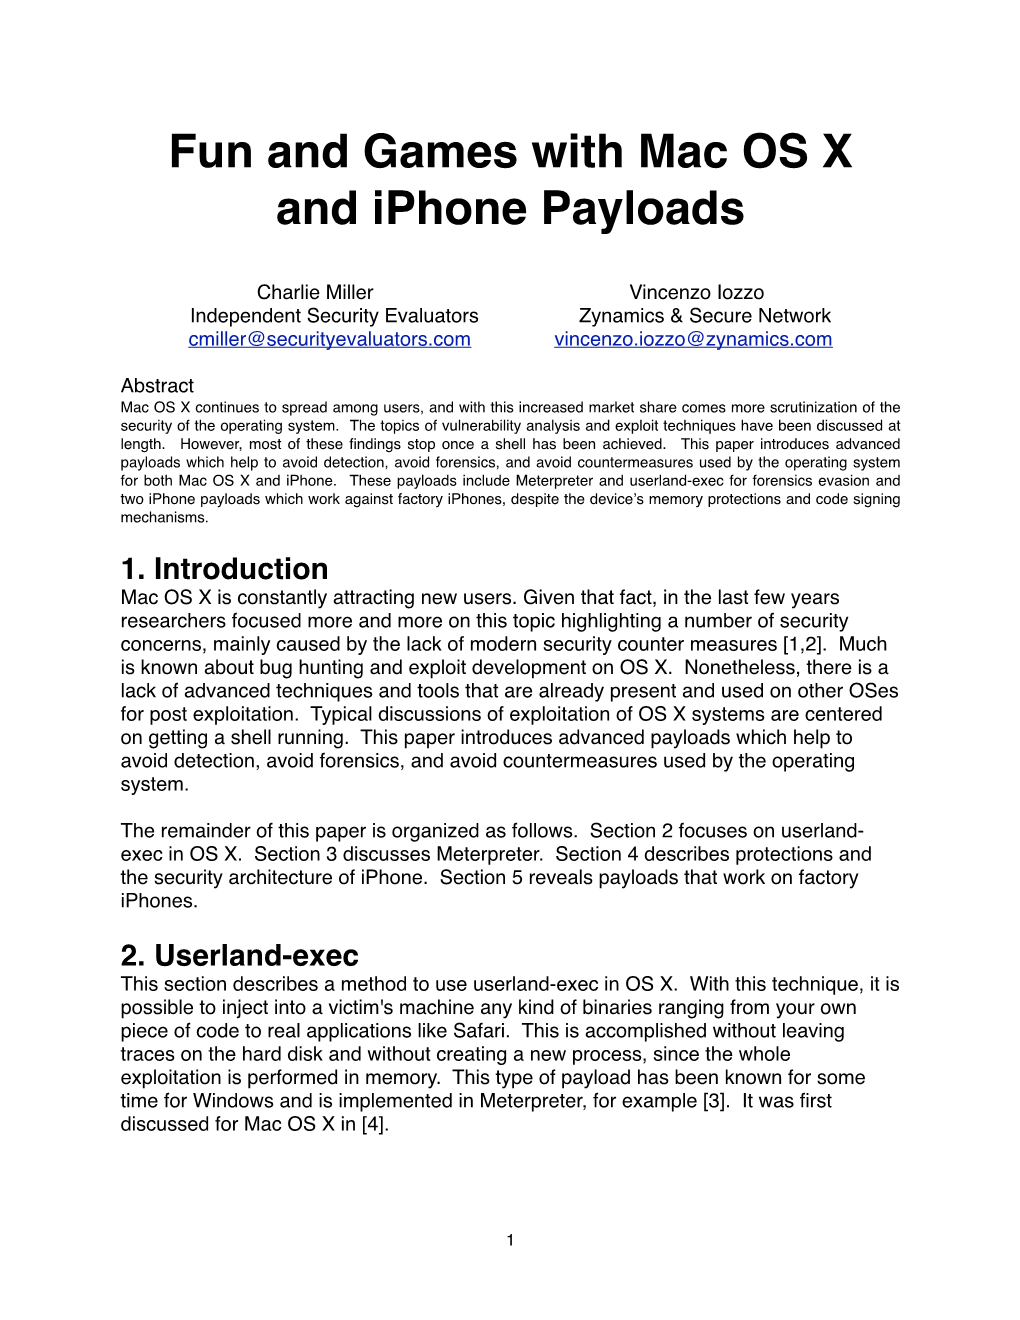 Fun and Games with Mac OS X and Iphone Payloads